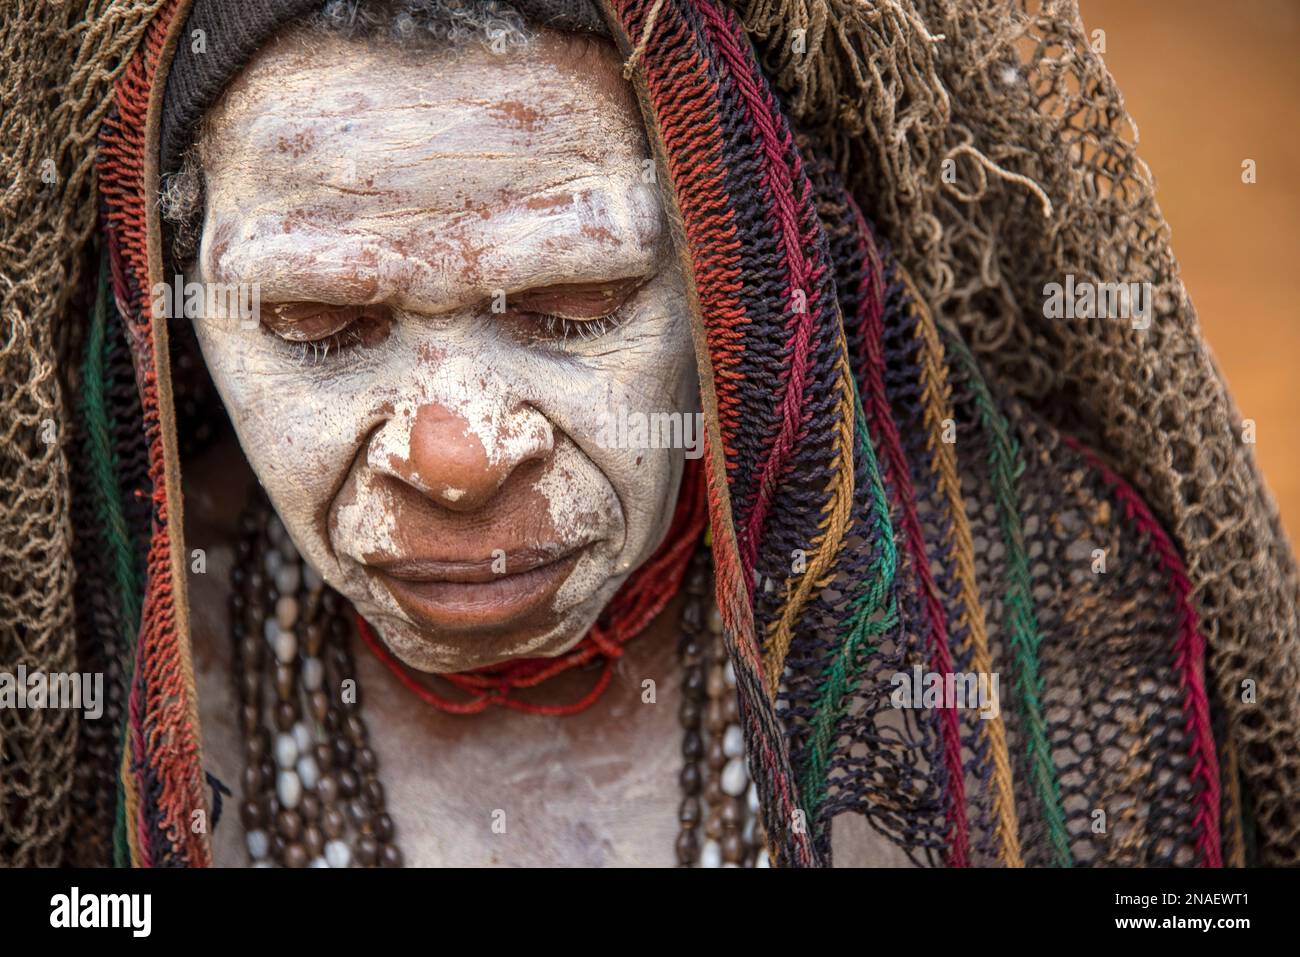 Huli tribe member in the Tari Valley area in Papua New Guinea’s Southern Highlands, wearing a traditional wig. Stock Photo